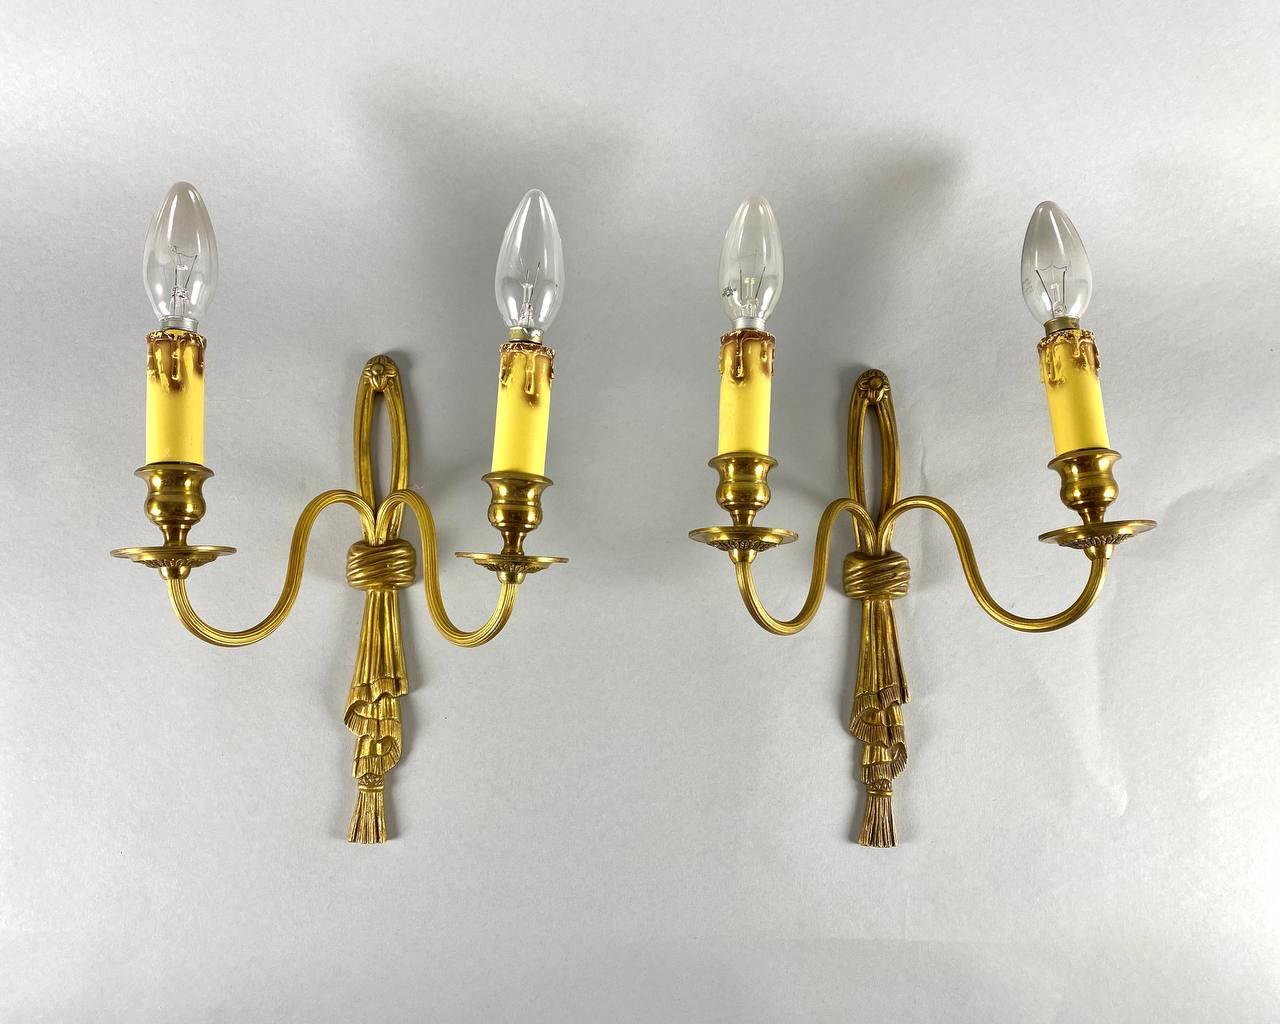 Exquisite Vintage Bronze Wall Sconces with Candles, Set of 2 For Sale 1